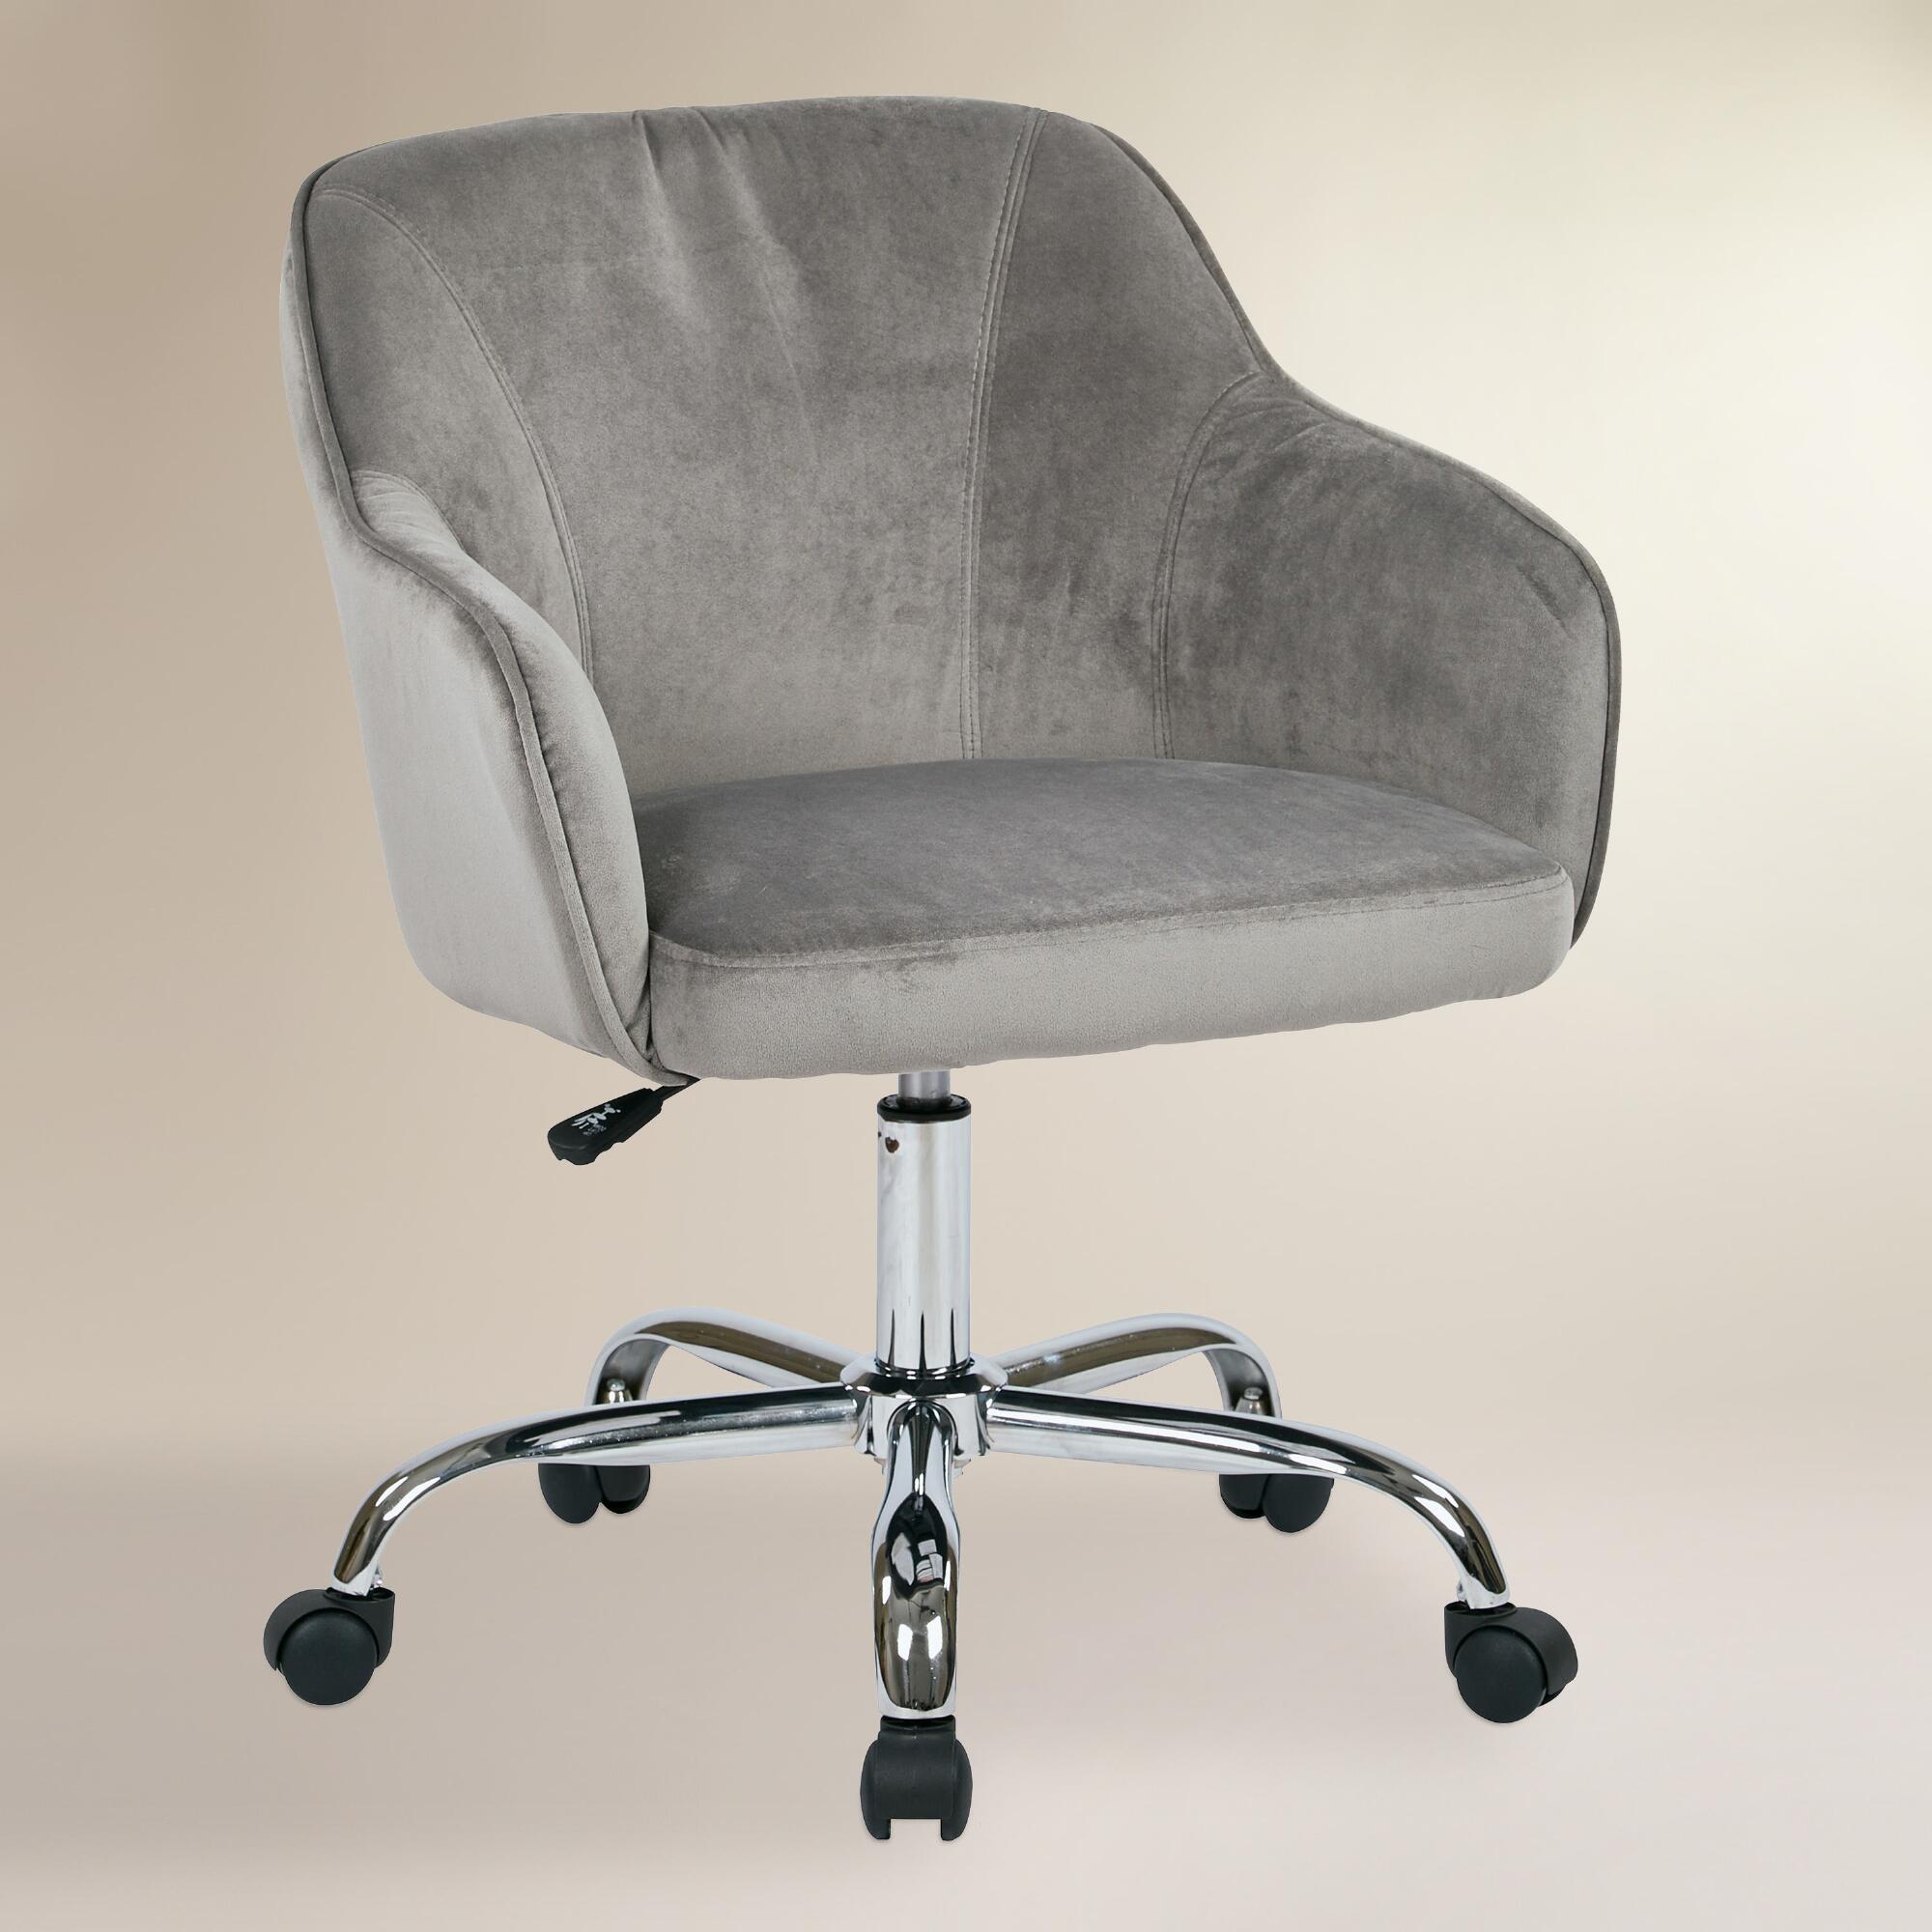 fabric office chairs with arms and wheels architecture: upholstered office chair on casters popular without wheels CBWXDOB